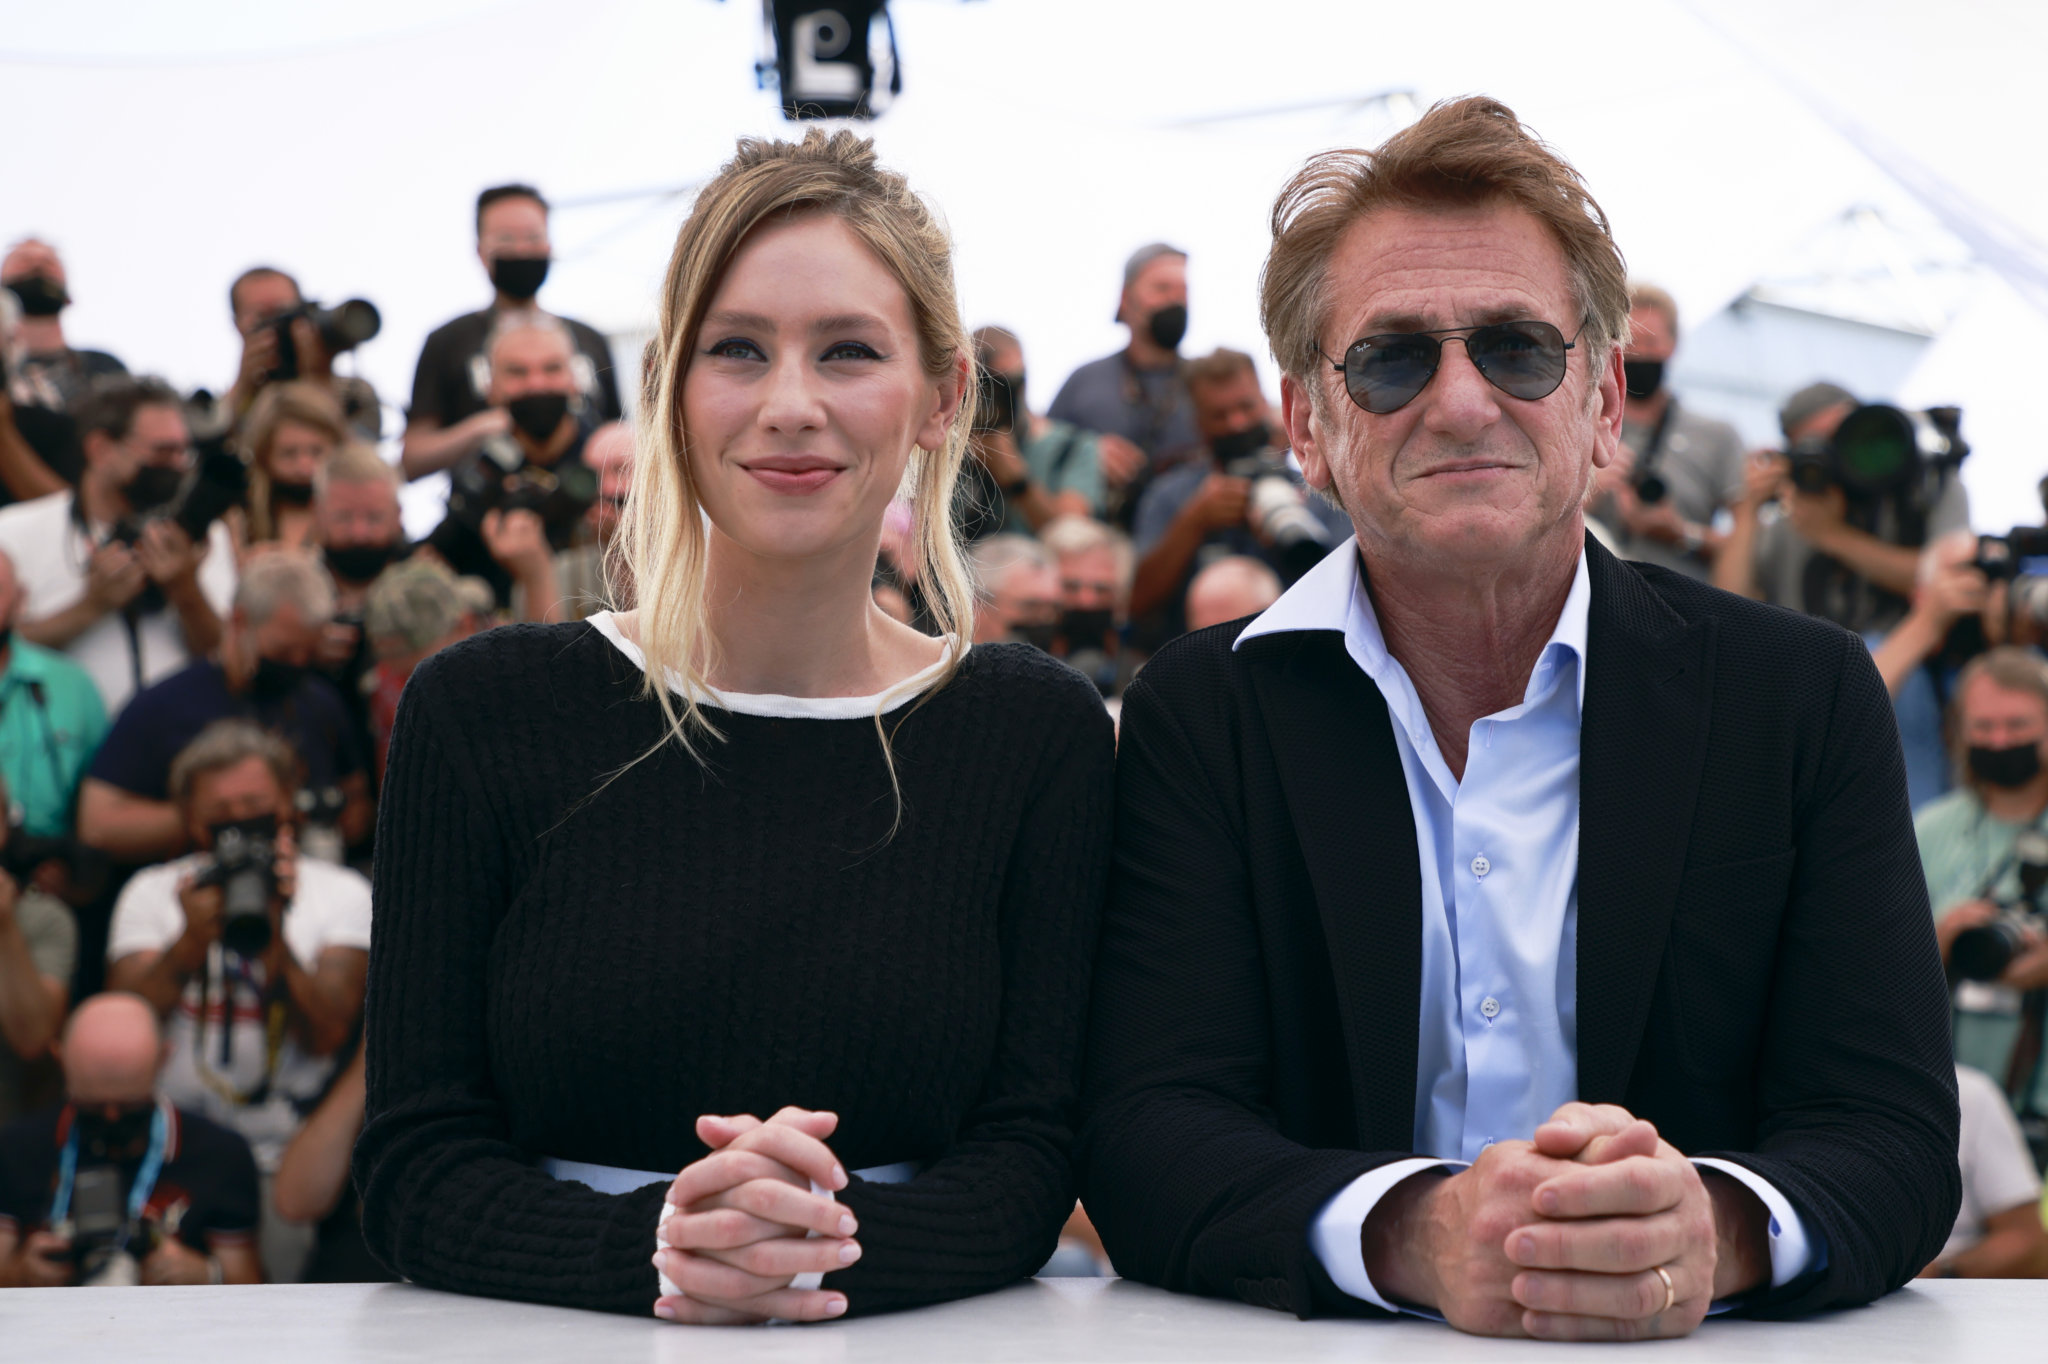 Acting with daughter, Sean Penn explores family ties in Cannes film